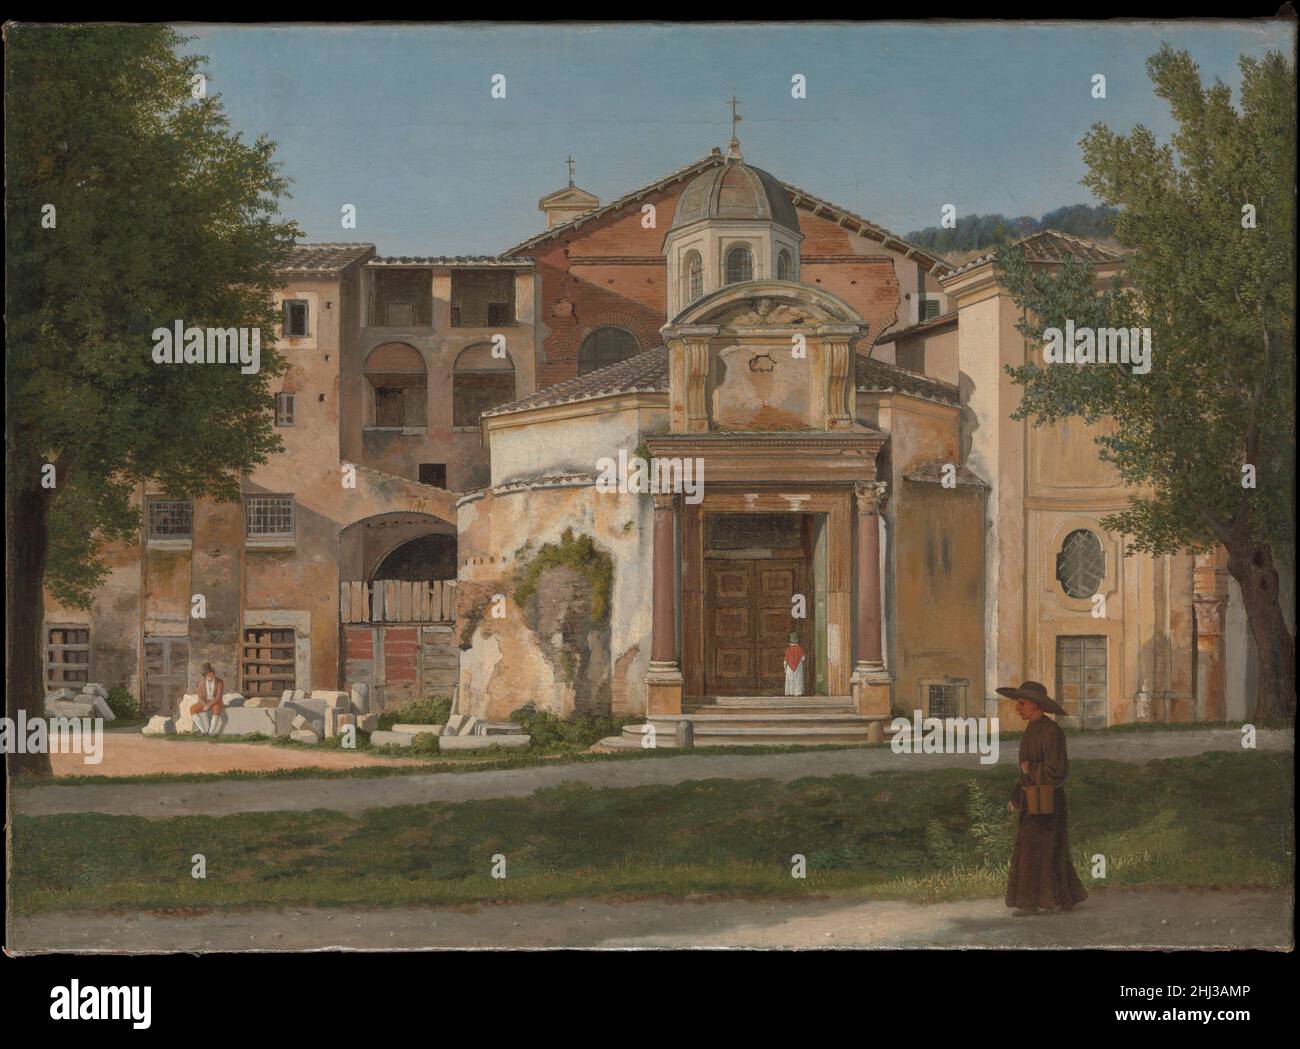 A Section of the Via Sacra, Rome (The Church of Saints Cosmas and Damian) ca. 1814–15 Christoffer Wilhelm Eckersberg Danish In Rome, between 1813 and 1816, Eckersberg produced a series of urban prospects remarkable for their scrupulously simple compositions and saturated hues. These studies were painted in repeated sittings before the motif in order to faithfully reproduce the effects of the Mediterranean sun on architectural ensembles. This frieze-like view depicts the fourth-century Temple of Romulus and Remus, which forms the vestibule of the sixth-century Church of Saints Cosmas and Damian Stock Photo